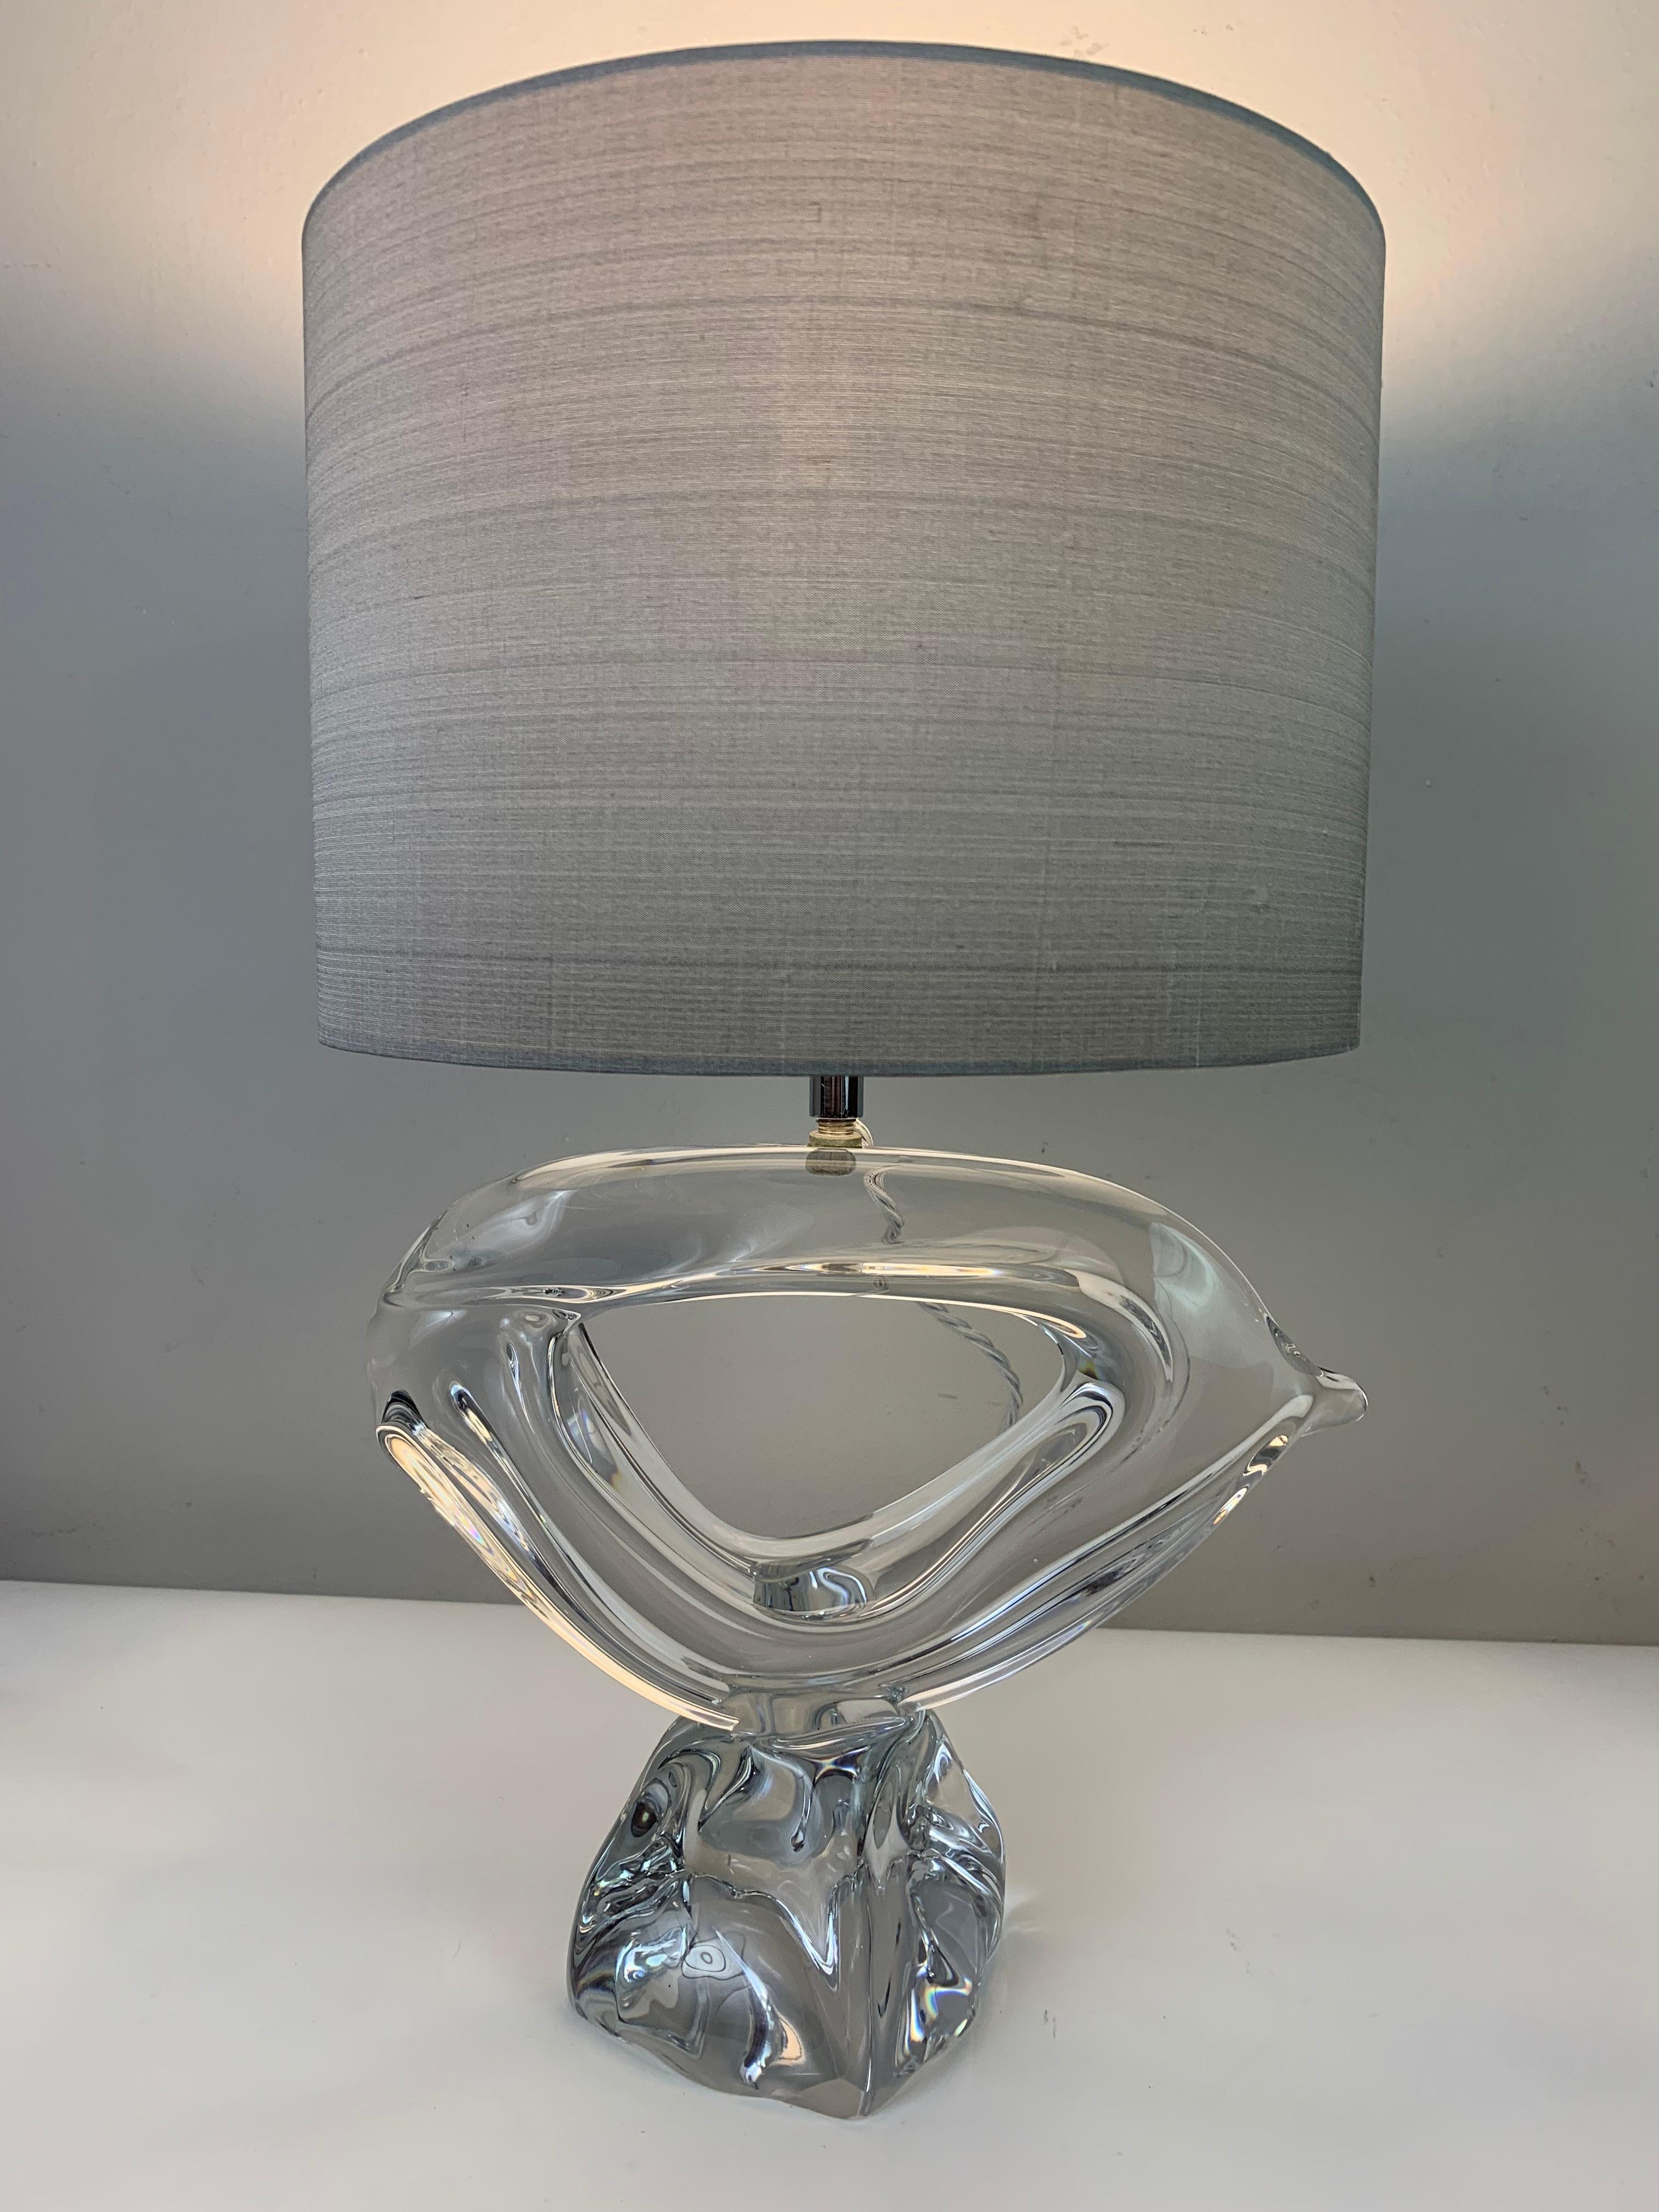 1960s crystal abstract table lamp manufactured by Daum France. An unusual amorphic sculptured formed lead crystal table lamp with a chrome bulb holder in the centre which is unusual for this design as they're usually on one side. 

The lamp is